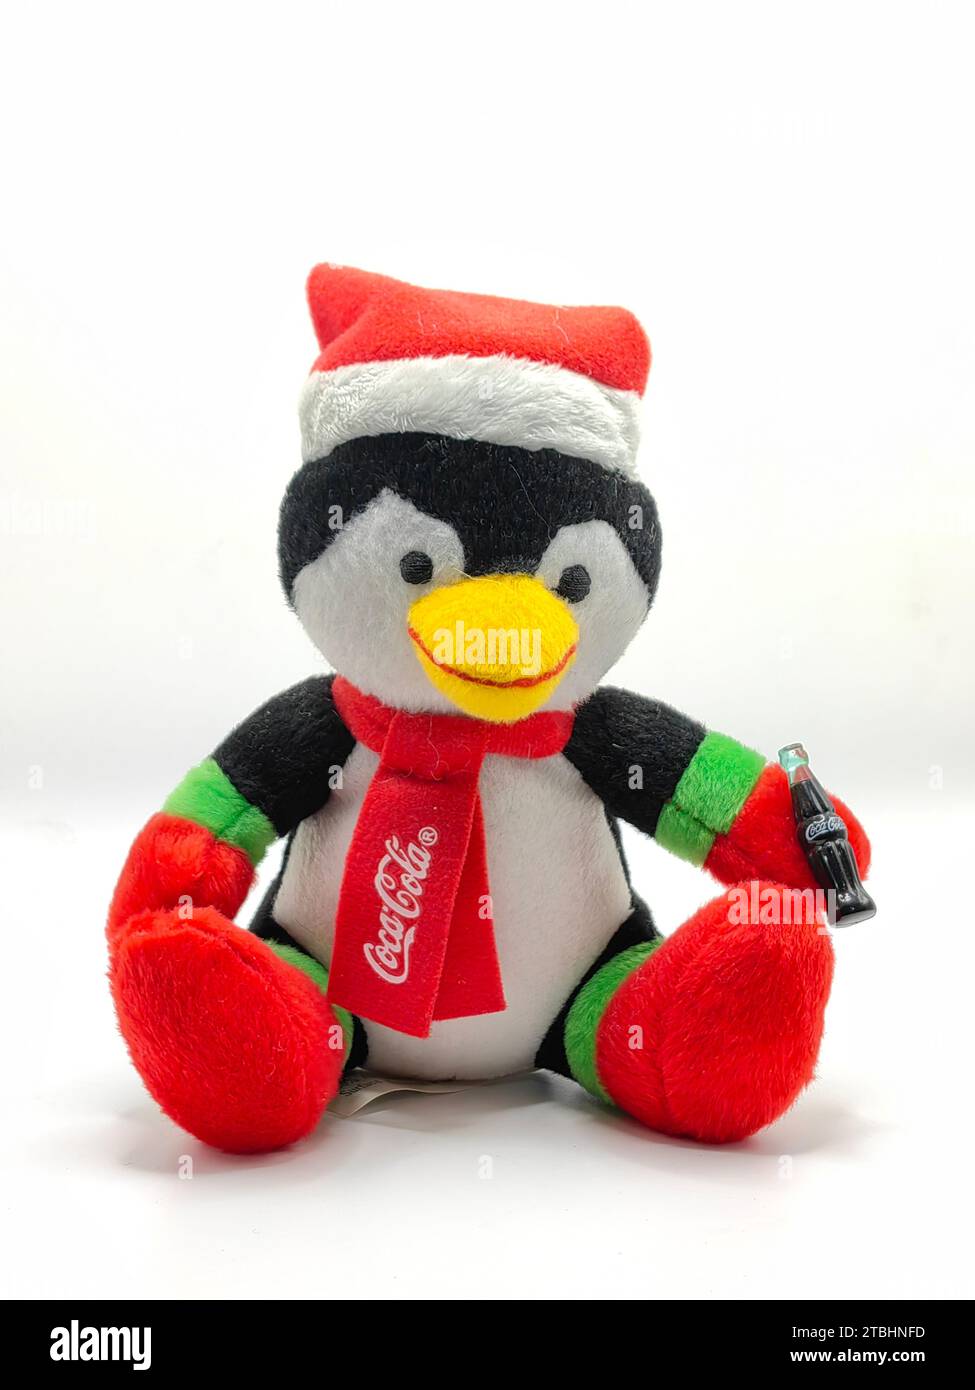 Isolated dark blue penguin,on white paper background. Wearing red christmas hat and scarf with coca cola logo on it.  Toy plush animal.Happy holidays. Stock Photo